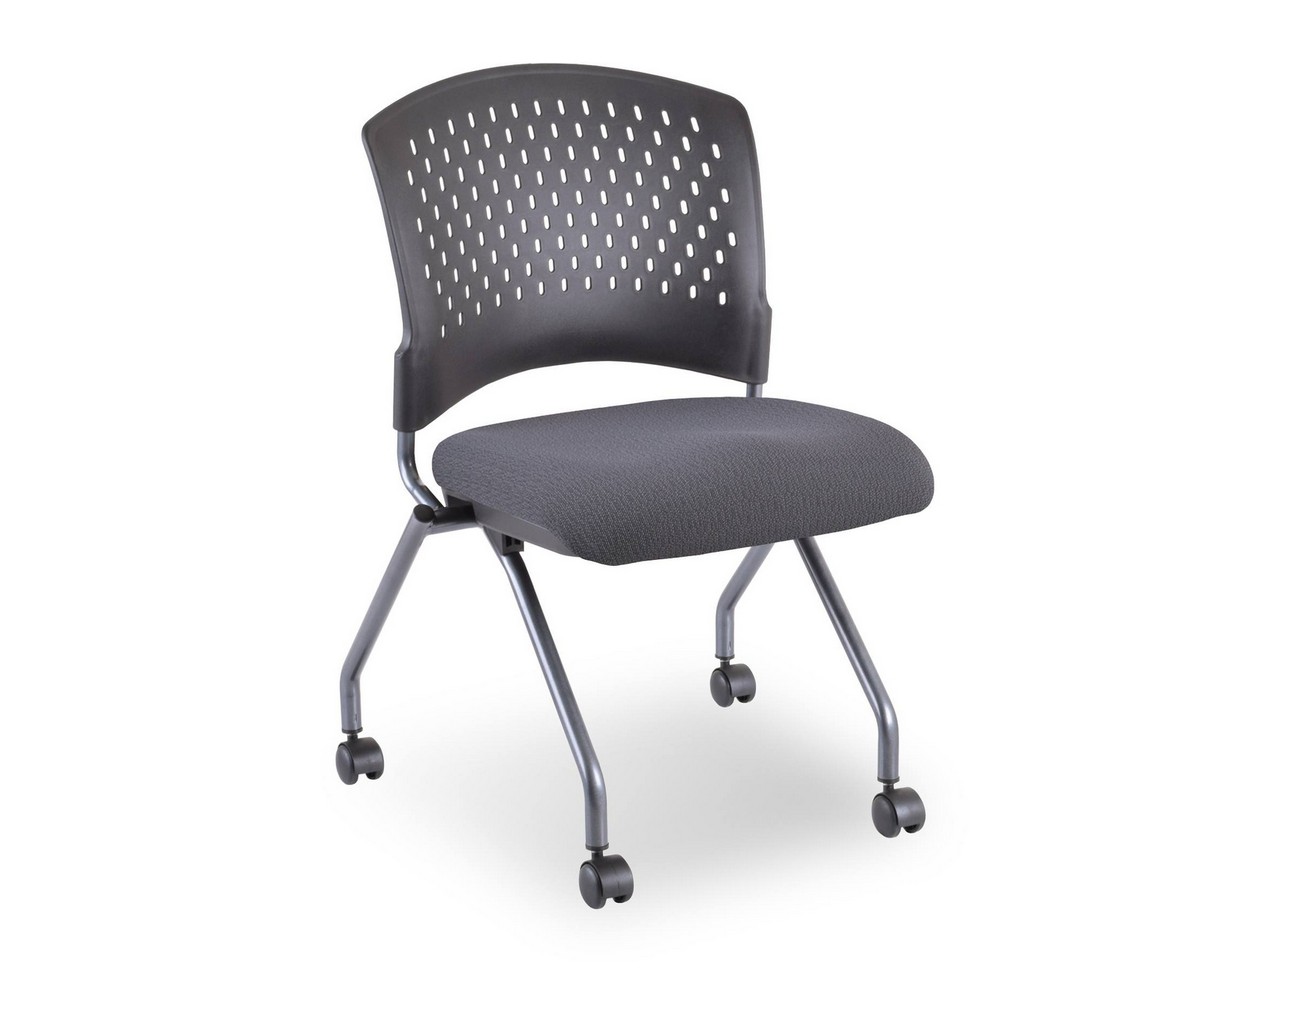 Agenda II Nesting Chair Without Arms – GREY Fabric SKU 3274T